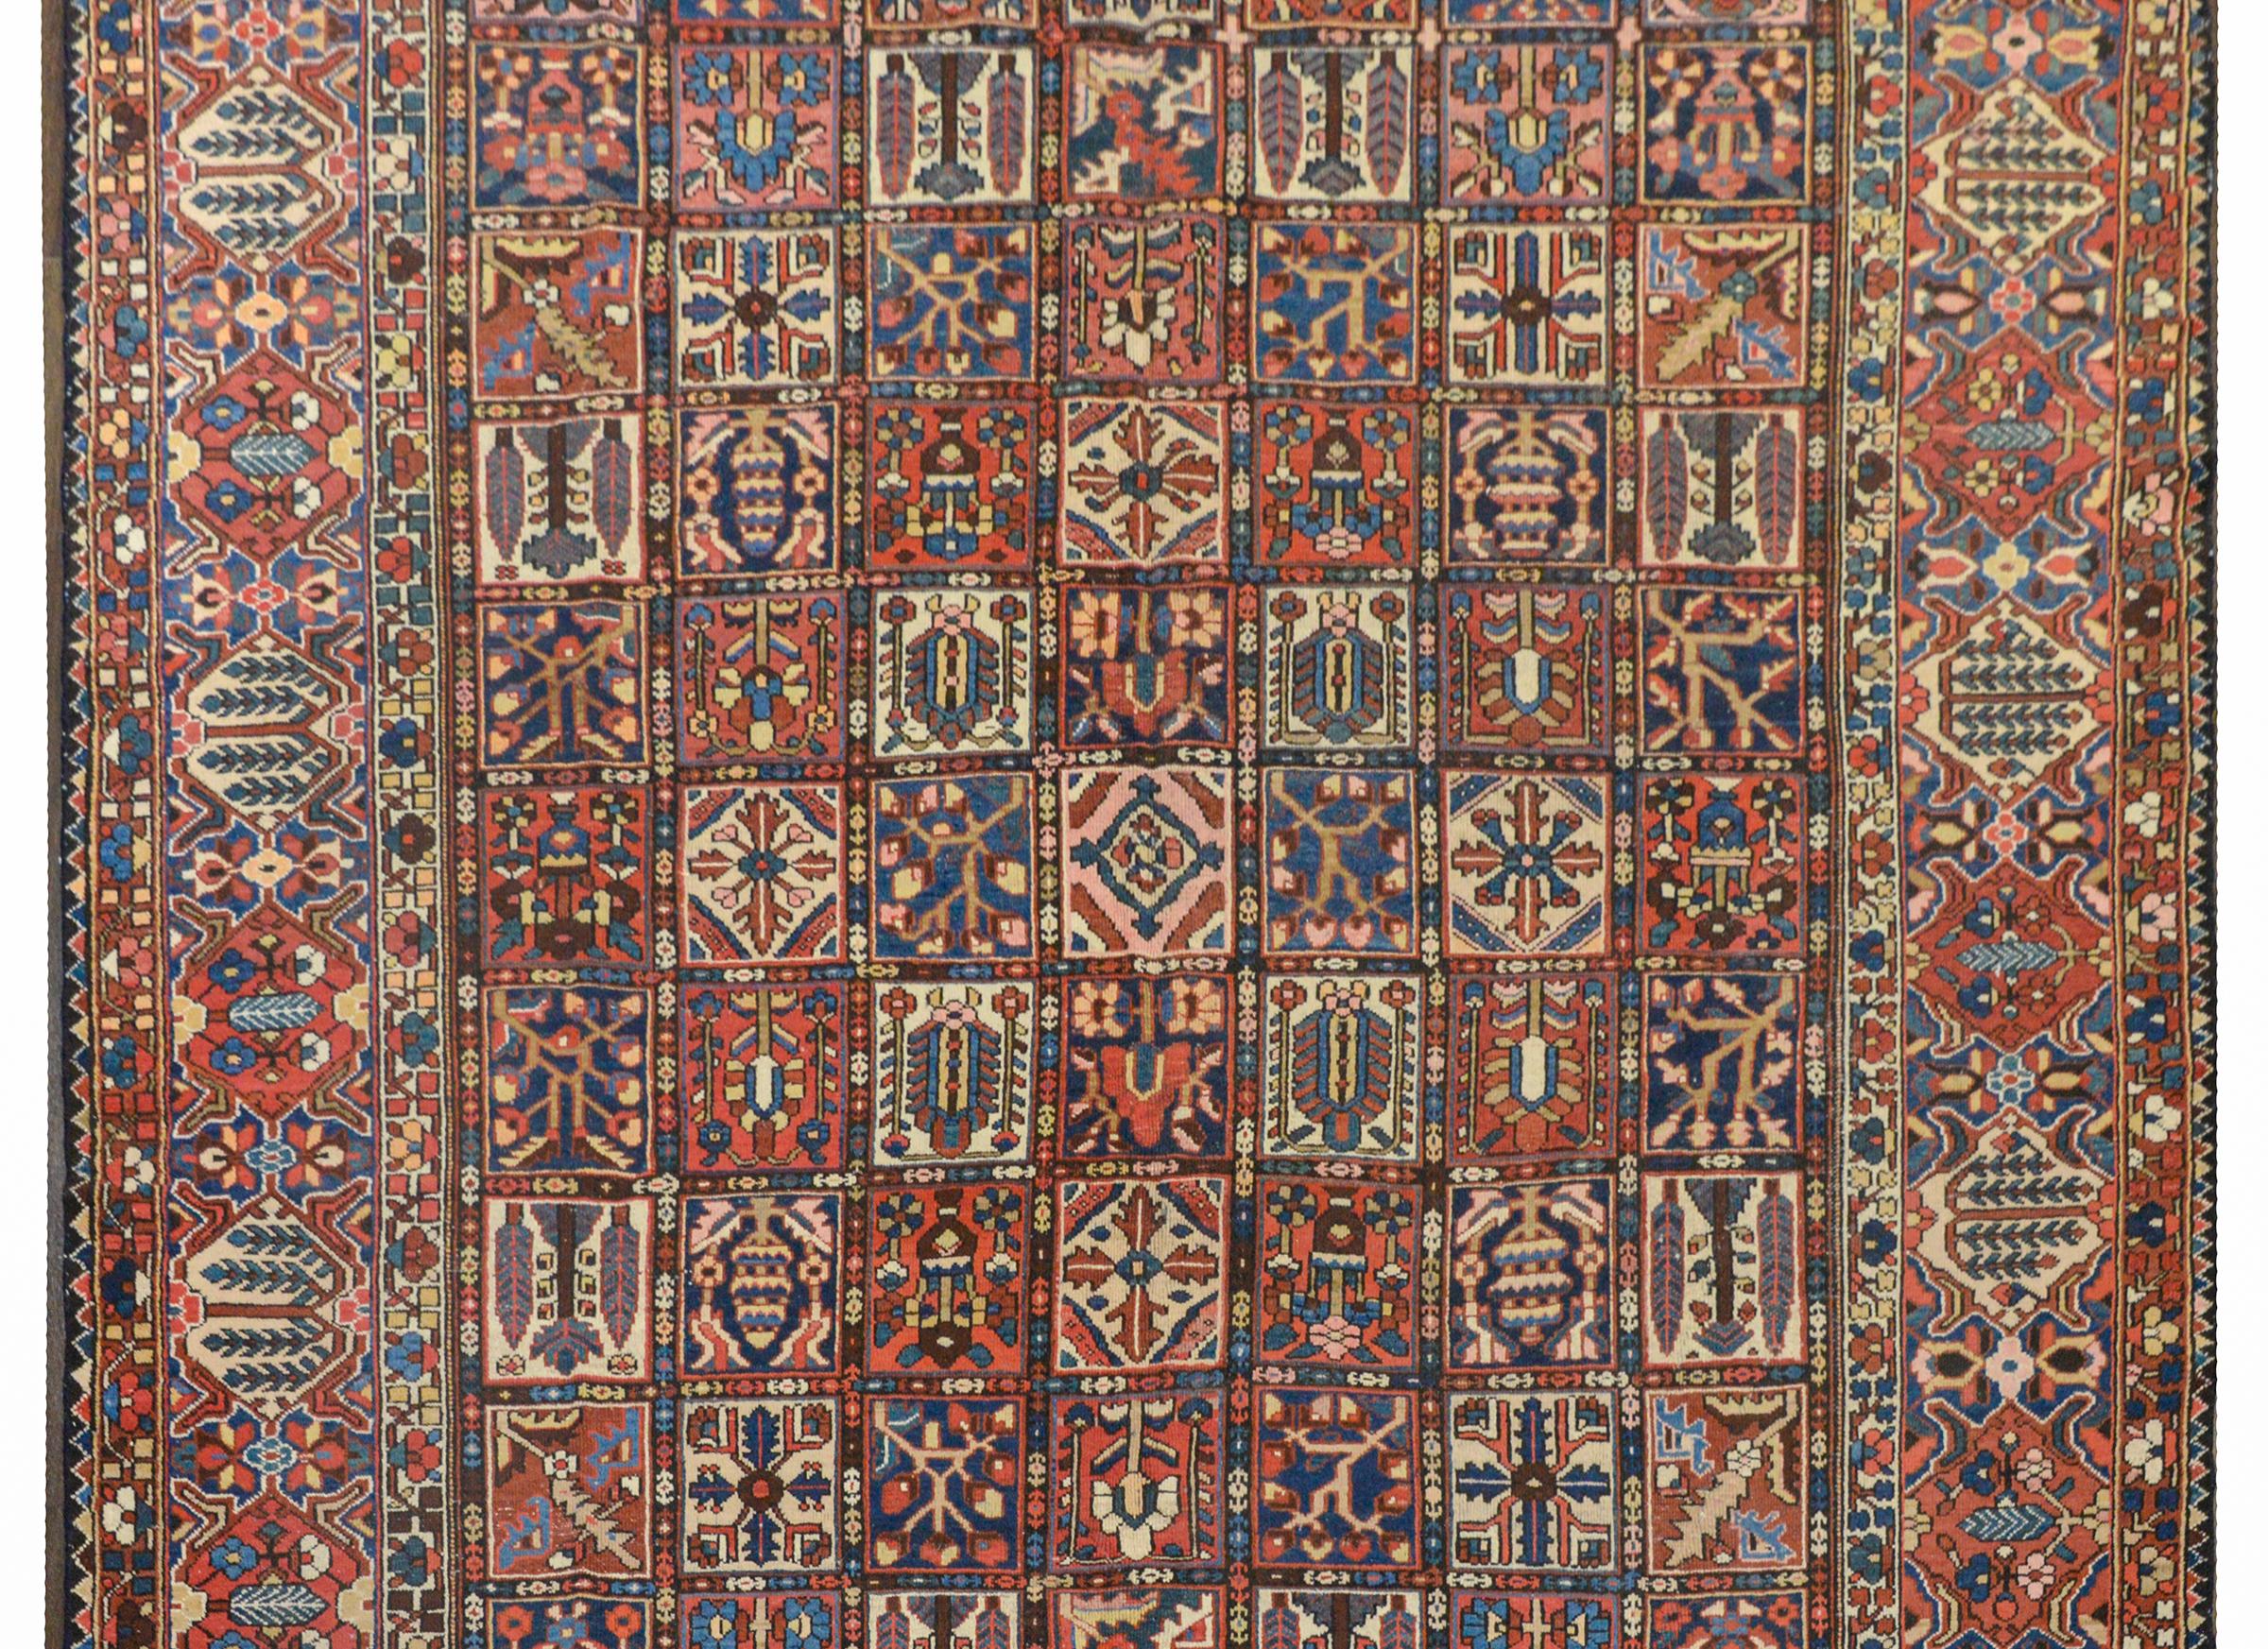 A wonderful early 20th century Persian Bakhtiari rug with a patchwork pattern of myriad stylized flowers and trees woven in crimson, light and dark indigo, green, and cream colored wool, surrounded by an extraordinary border with a large-scale